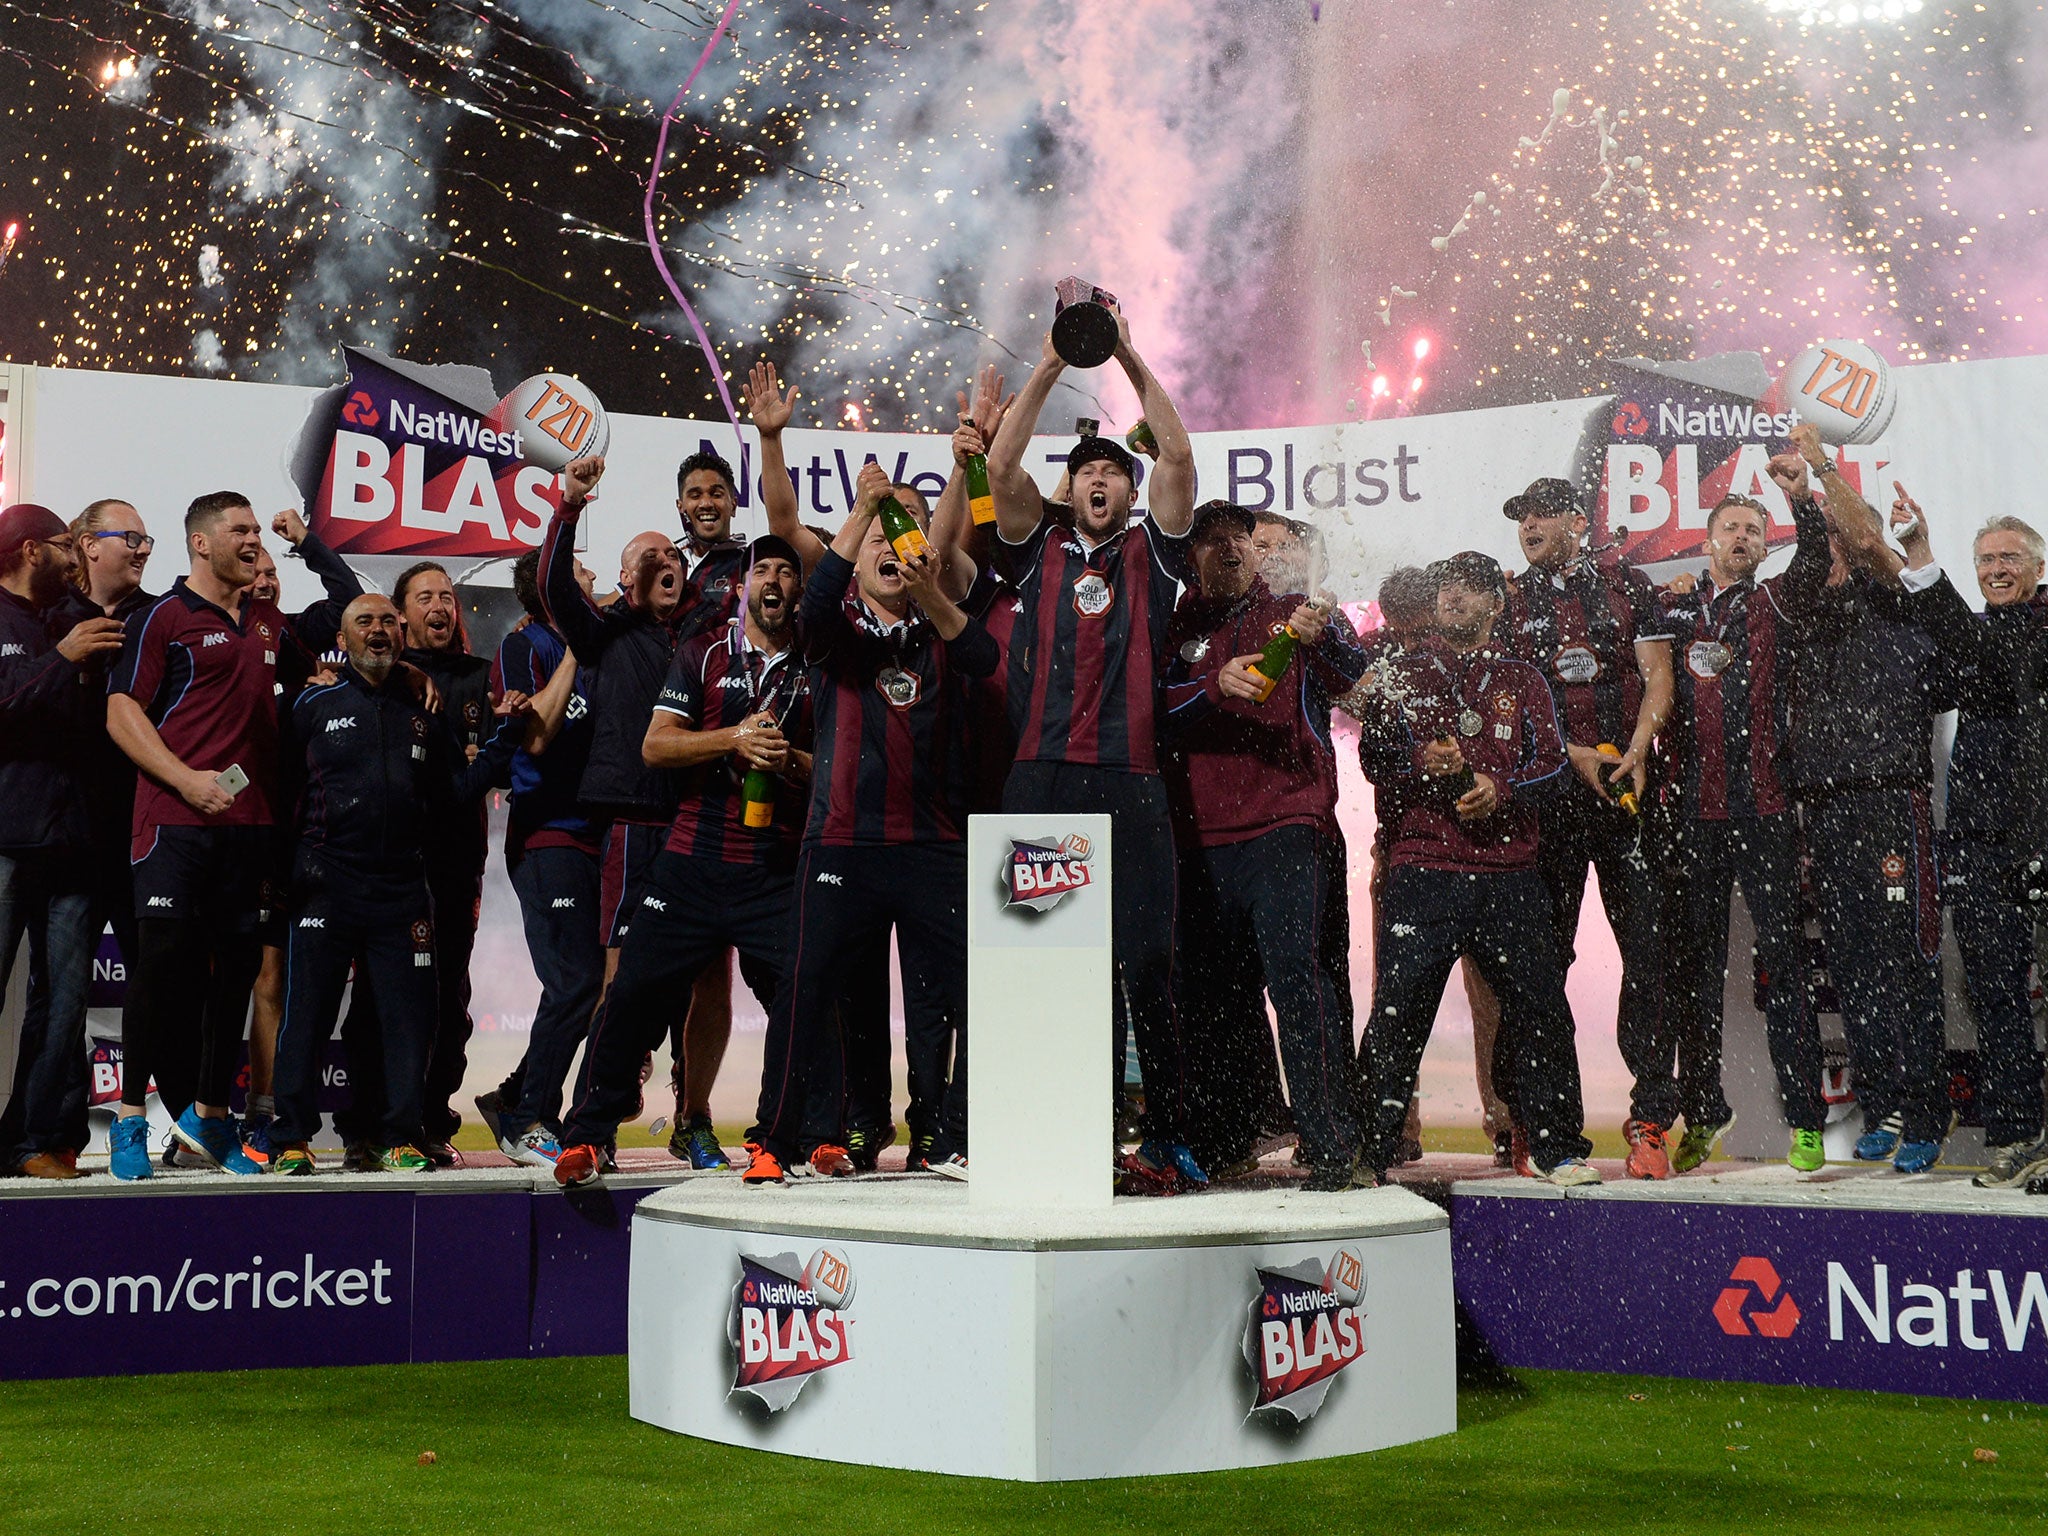 Northamptonshire celebrate after winning the Natwest T20 Blast final at Edgbaston cricket ground on August 20, 2016